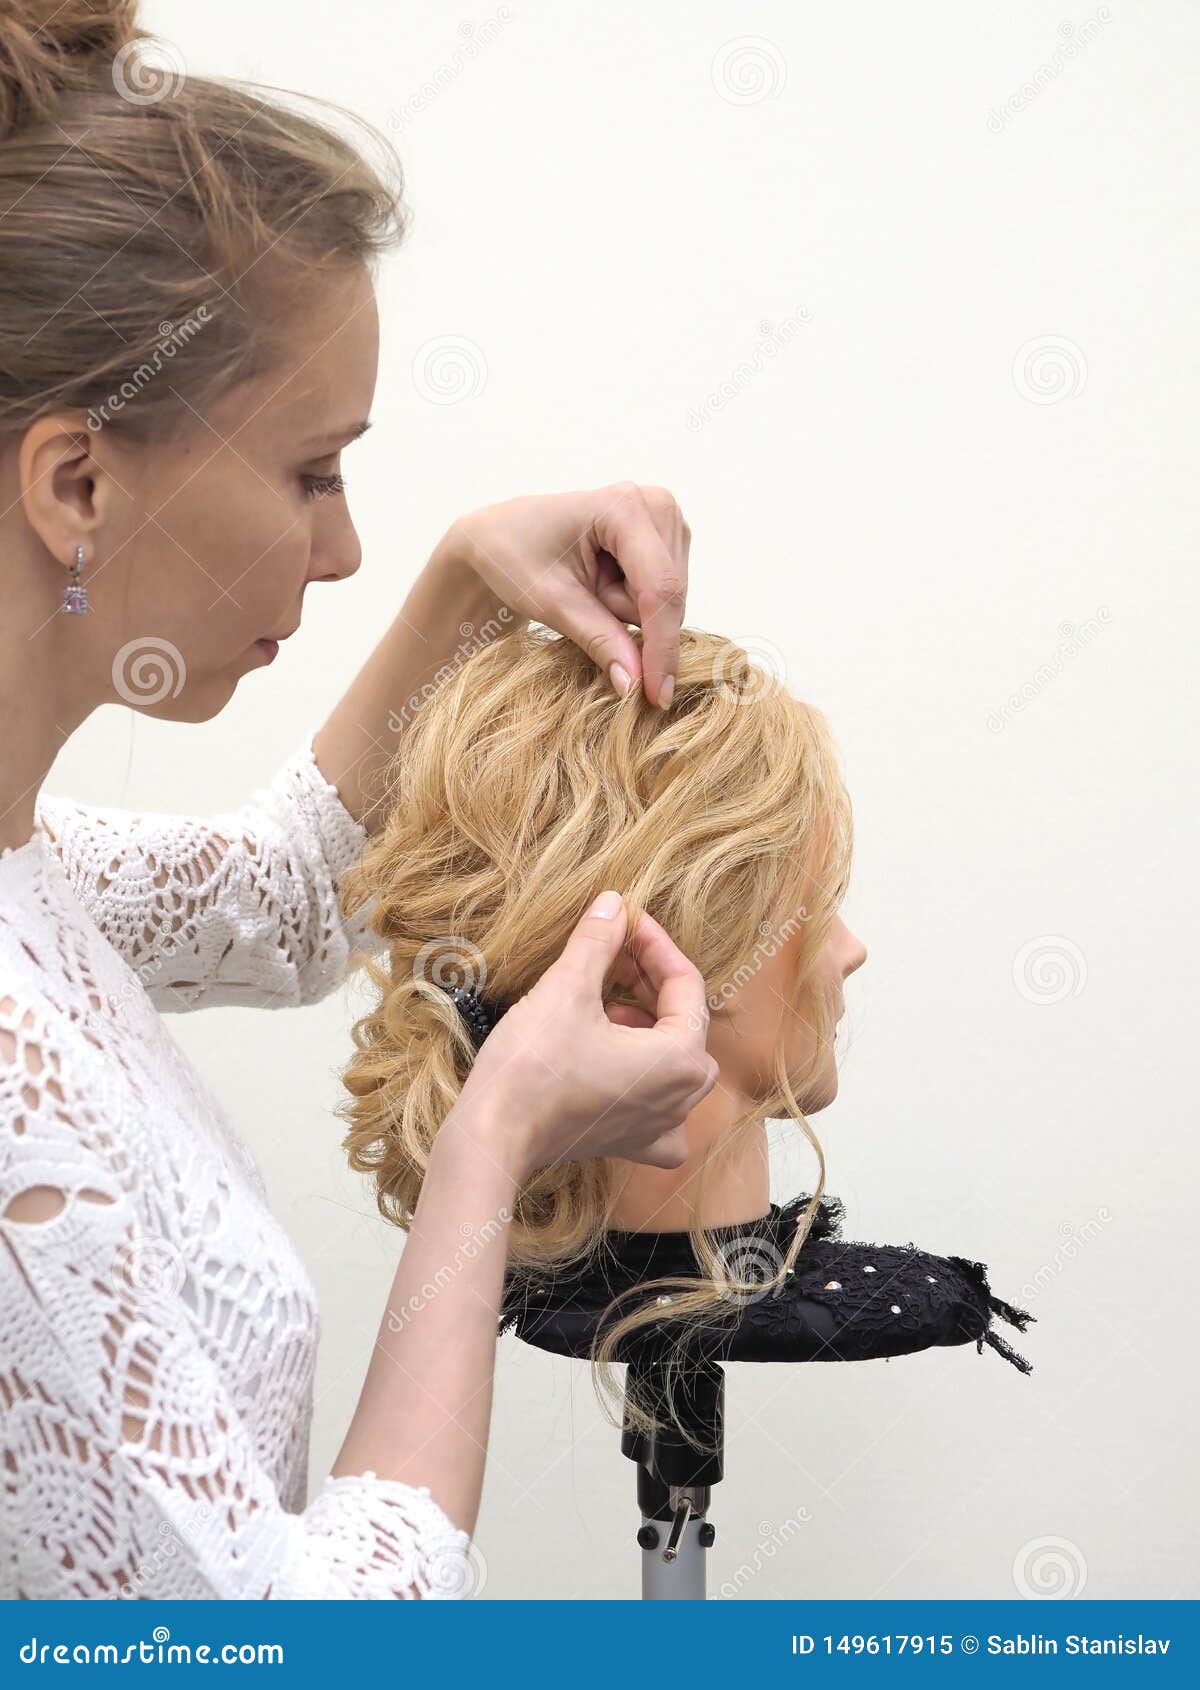 Training Hair Styling On A Mannequin Stock Image Image Of